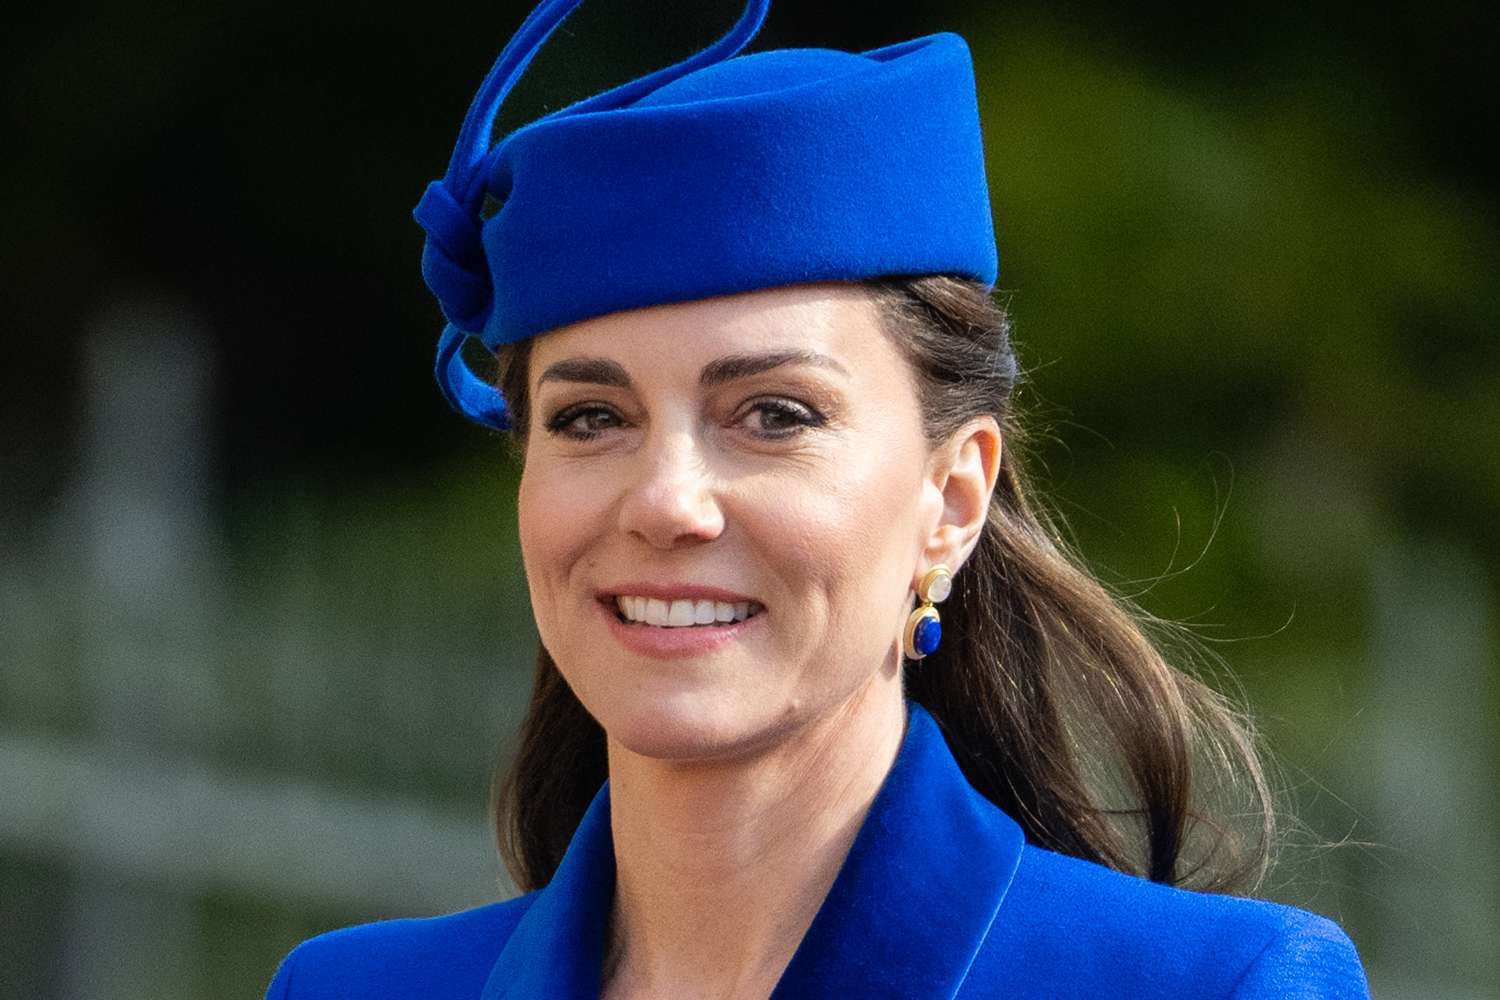 Kate Middleton's Milliner Creates Calendar Filled with Cute Hounds in